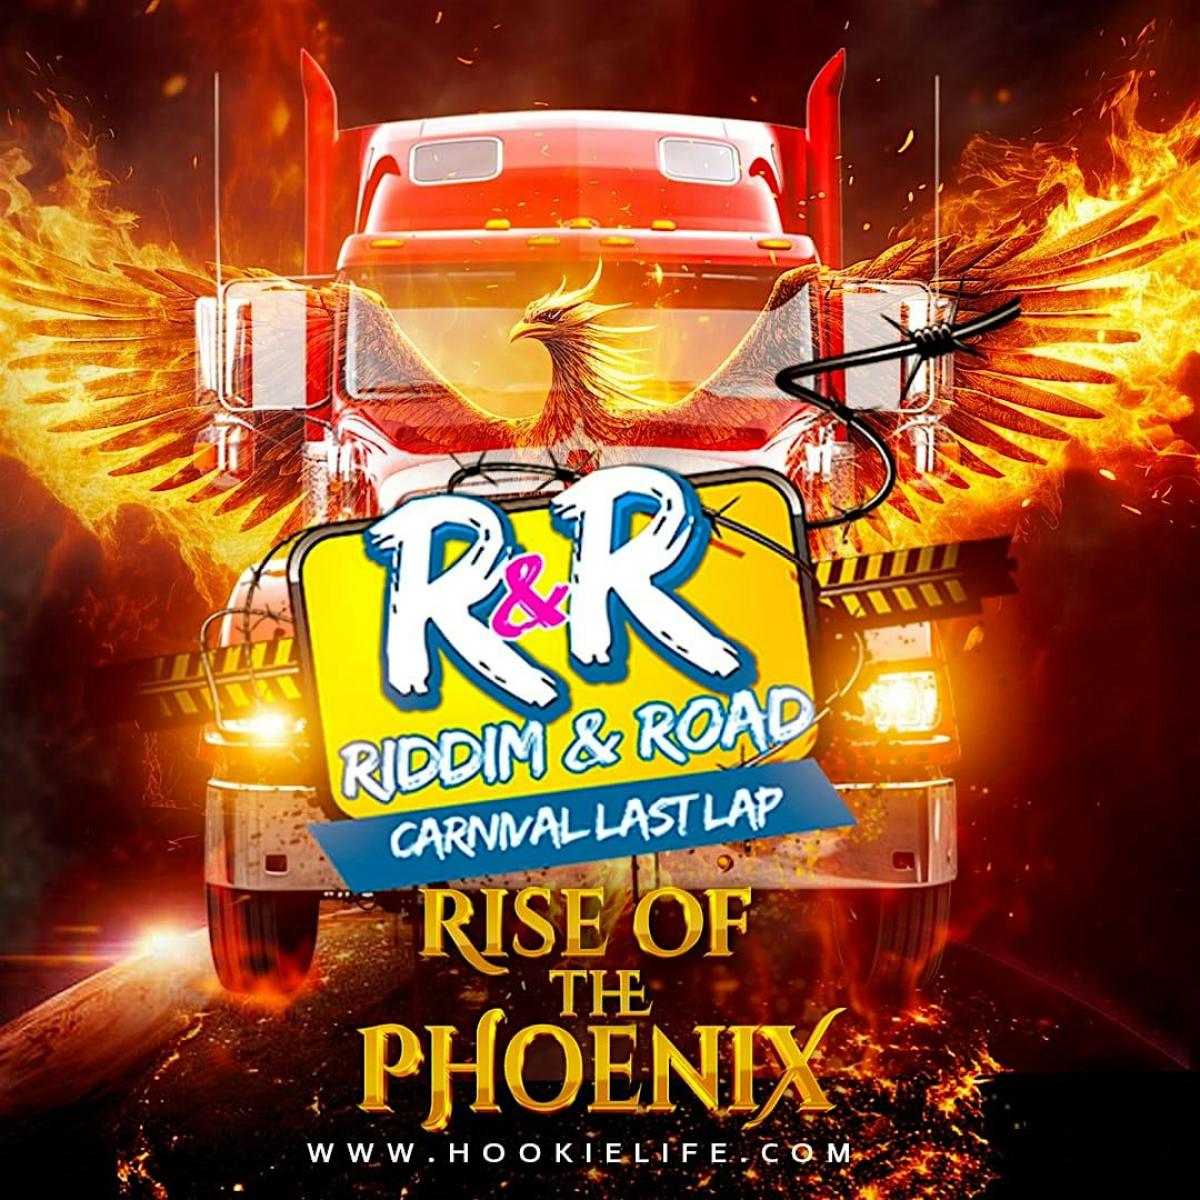 Riddim & Road: Rise of The Phoenix flyer or graphic.